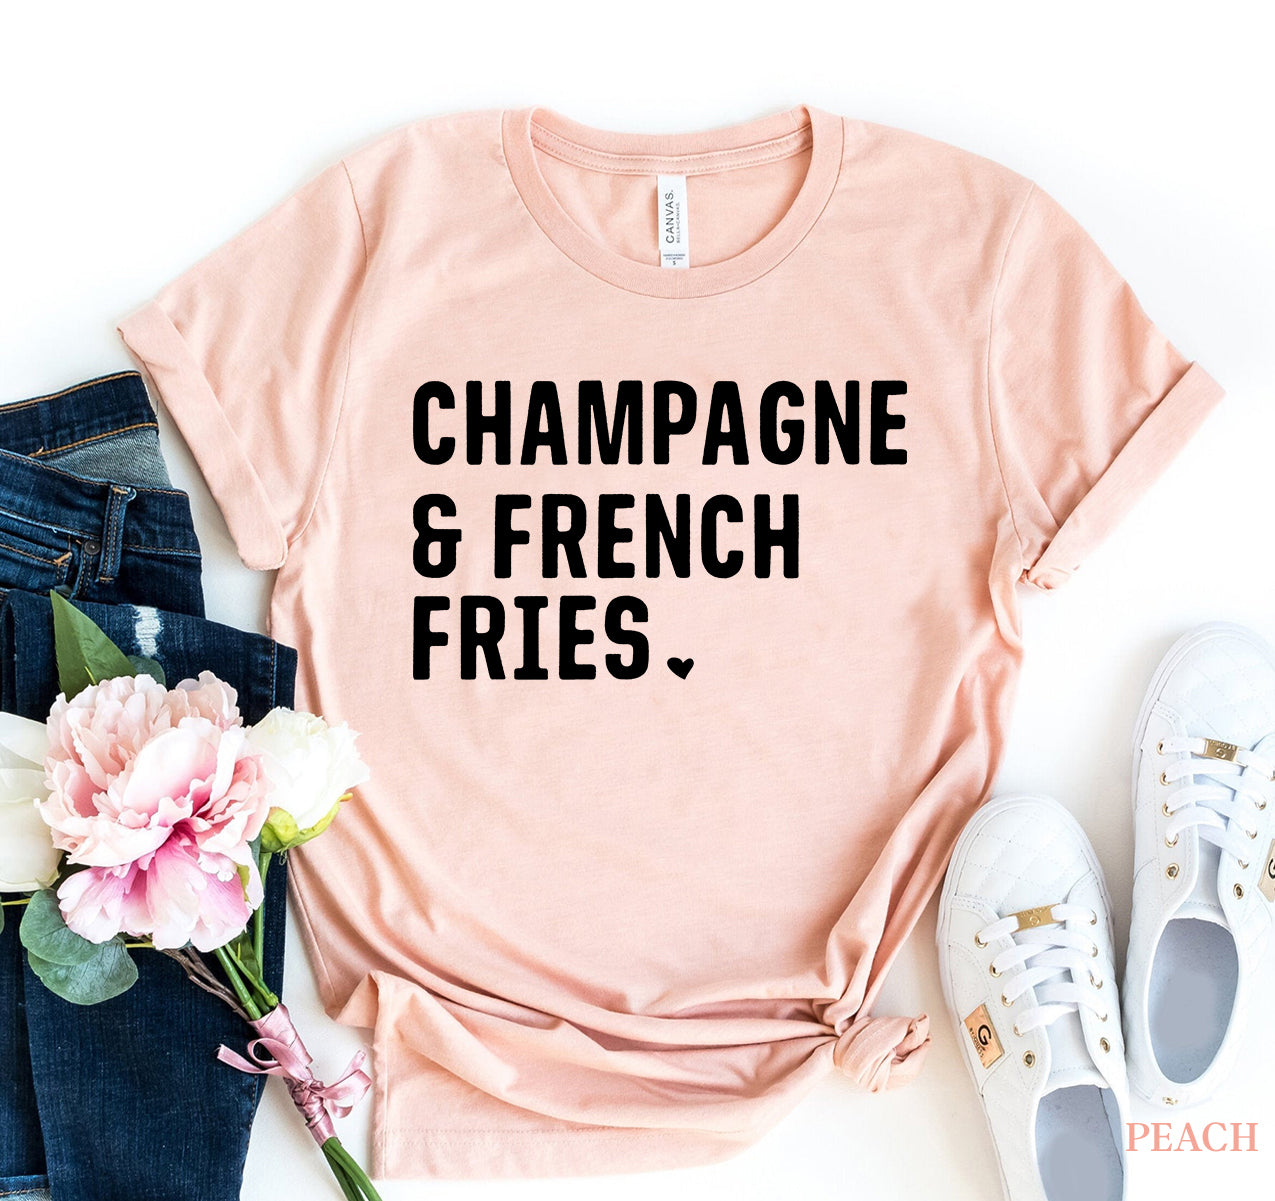 Champagne & French Fries